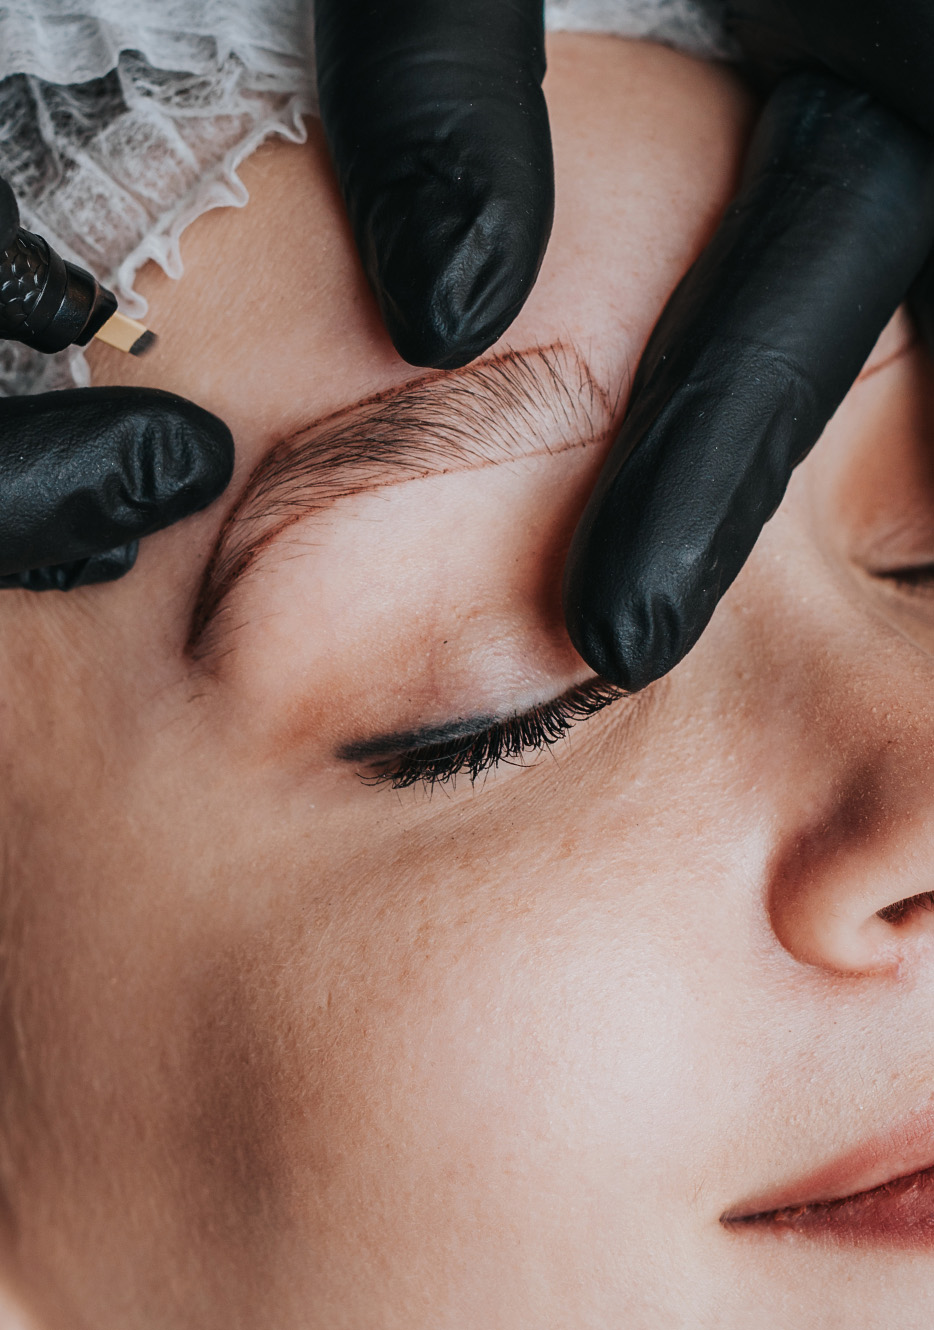 How Much Do Microblading Techs Make?